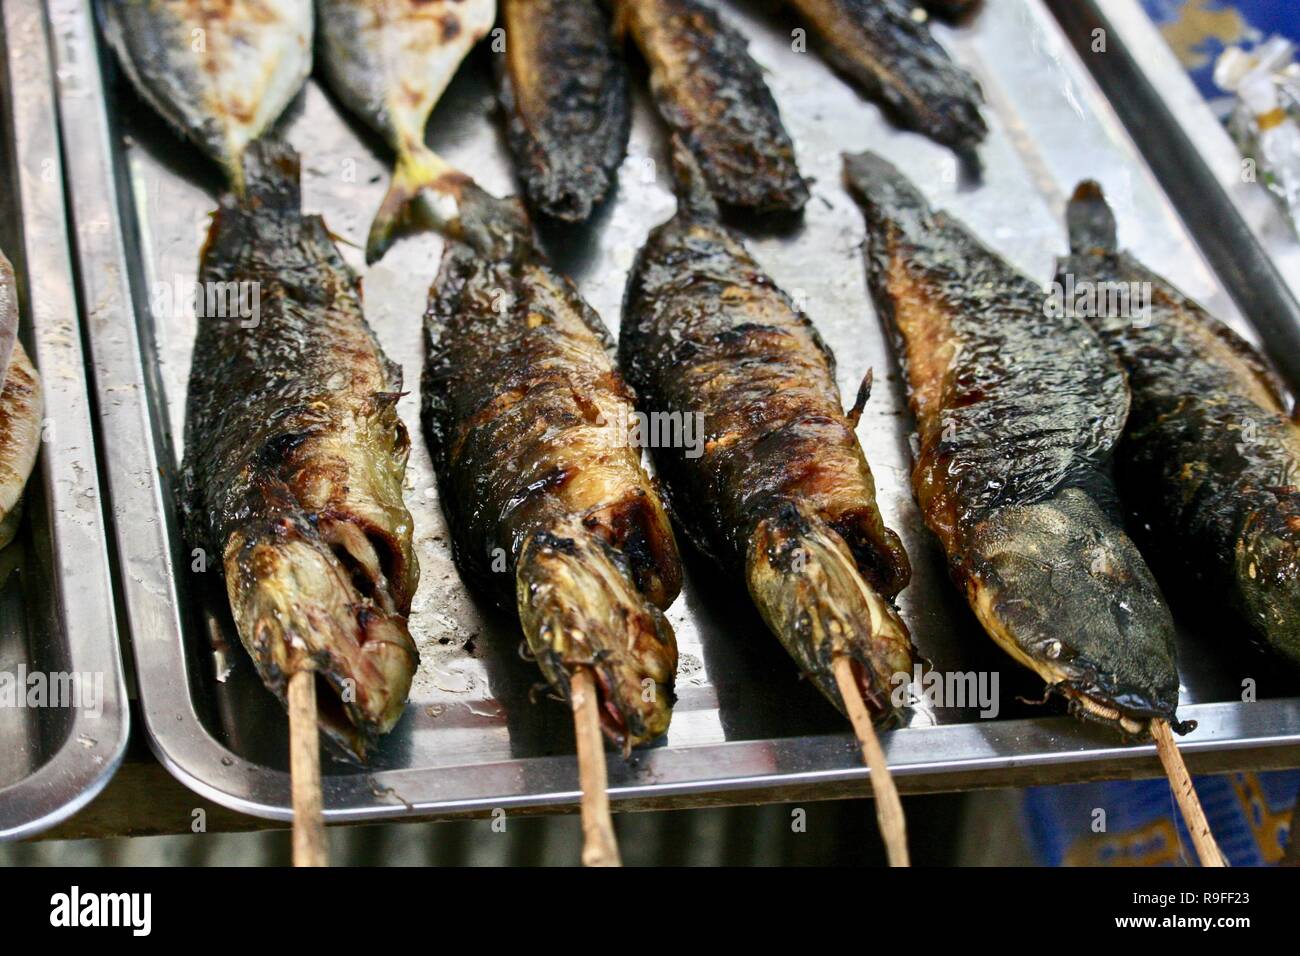 Grilled snake head fish on sticks sold as street food snacks at a seafood market in Cambodia Stock Photo